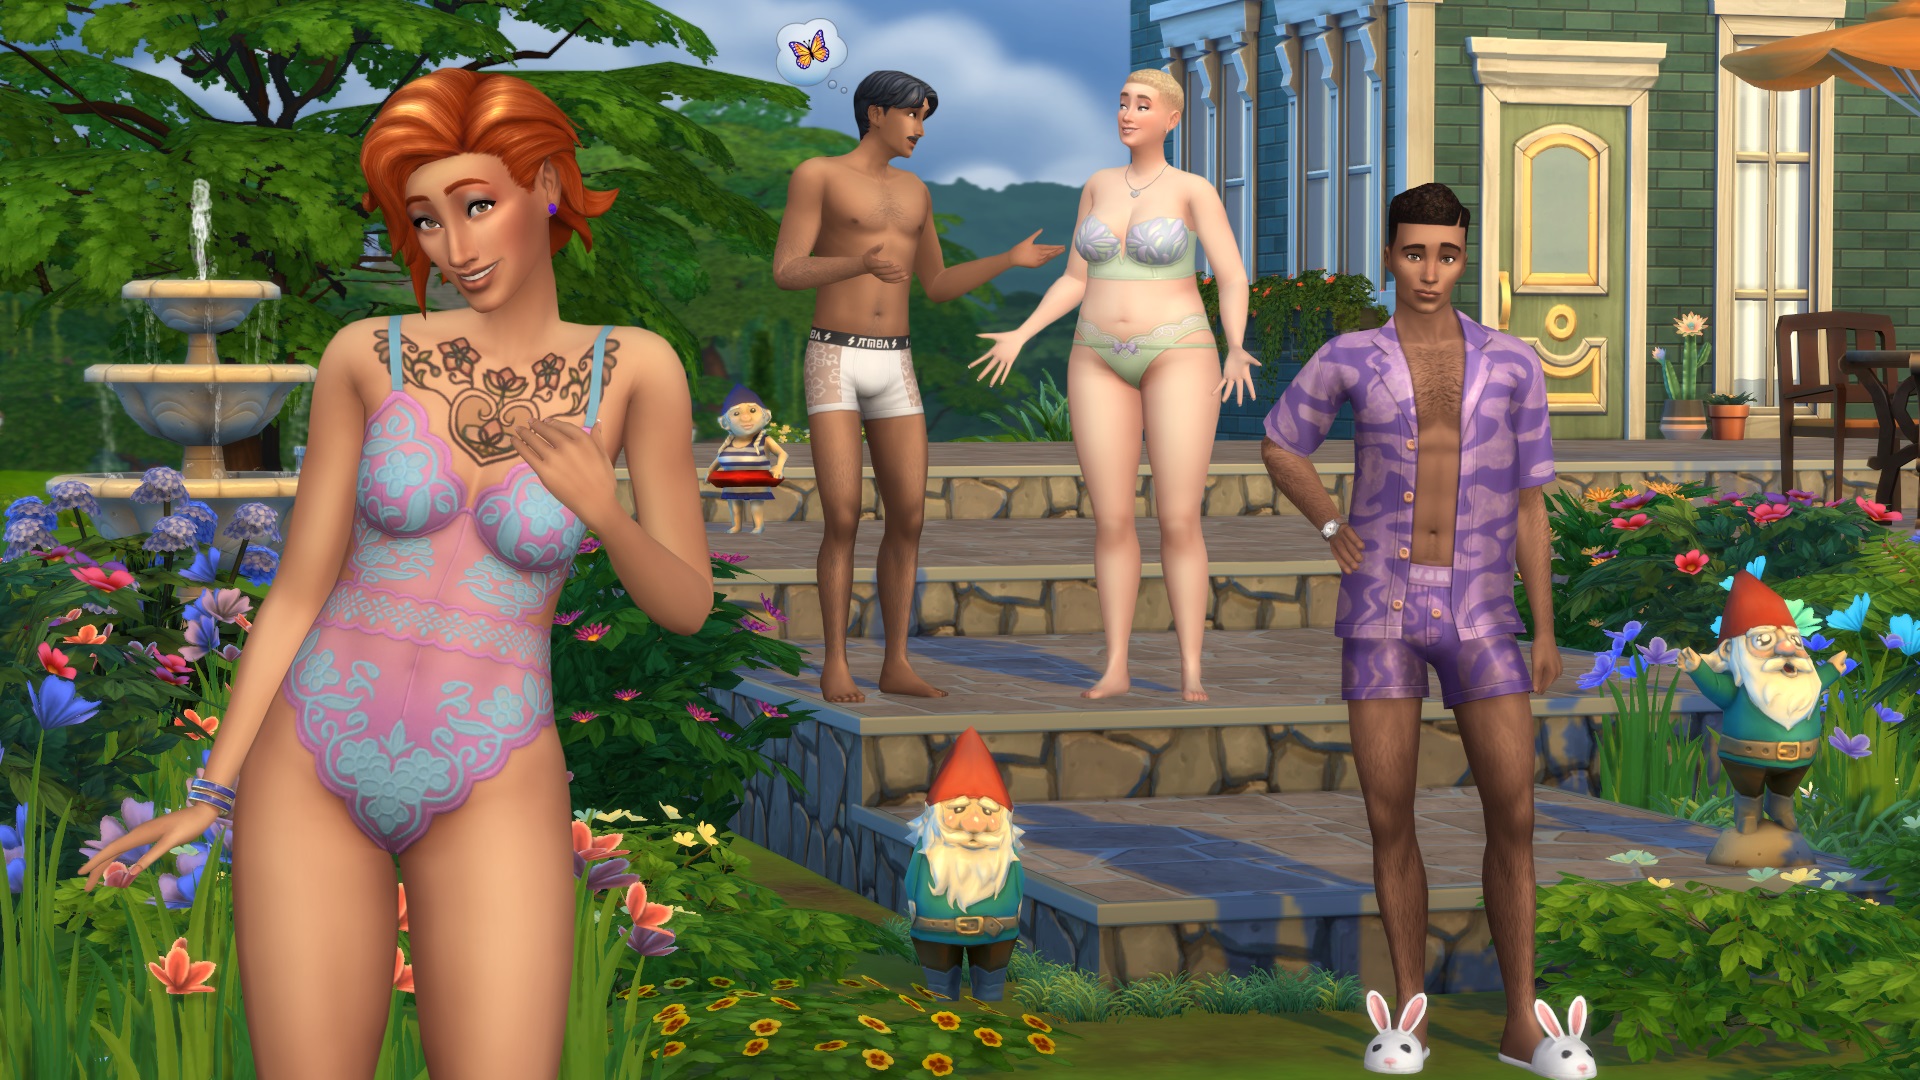 The Sims 4 kit Simtimates - several Sims wearing different combinations of underwear standing next to each other